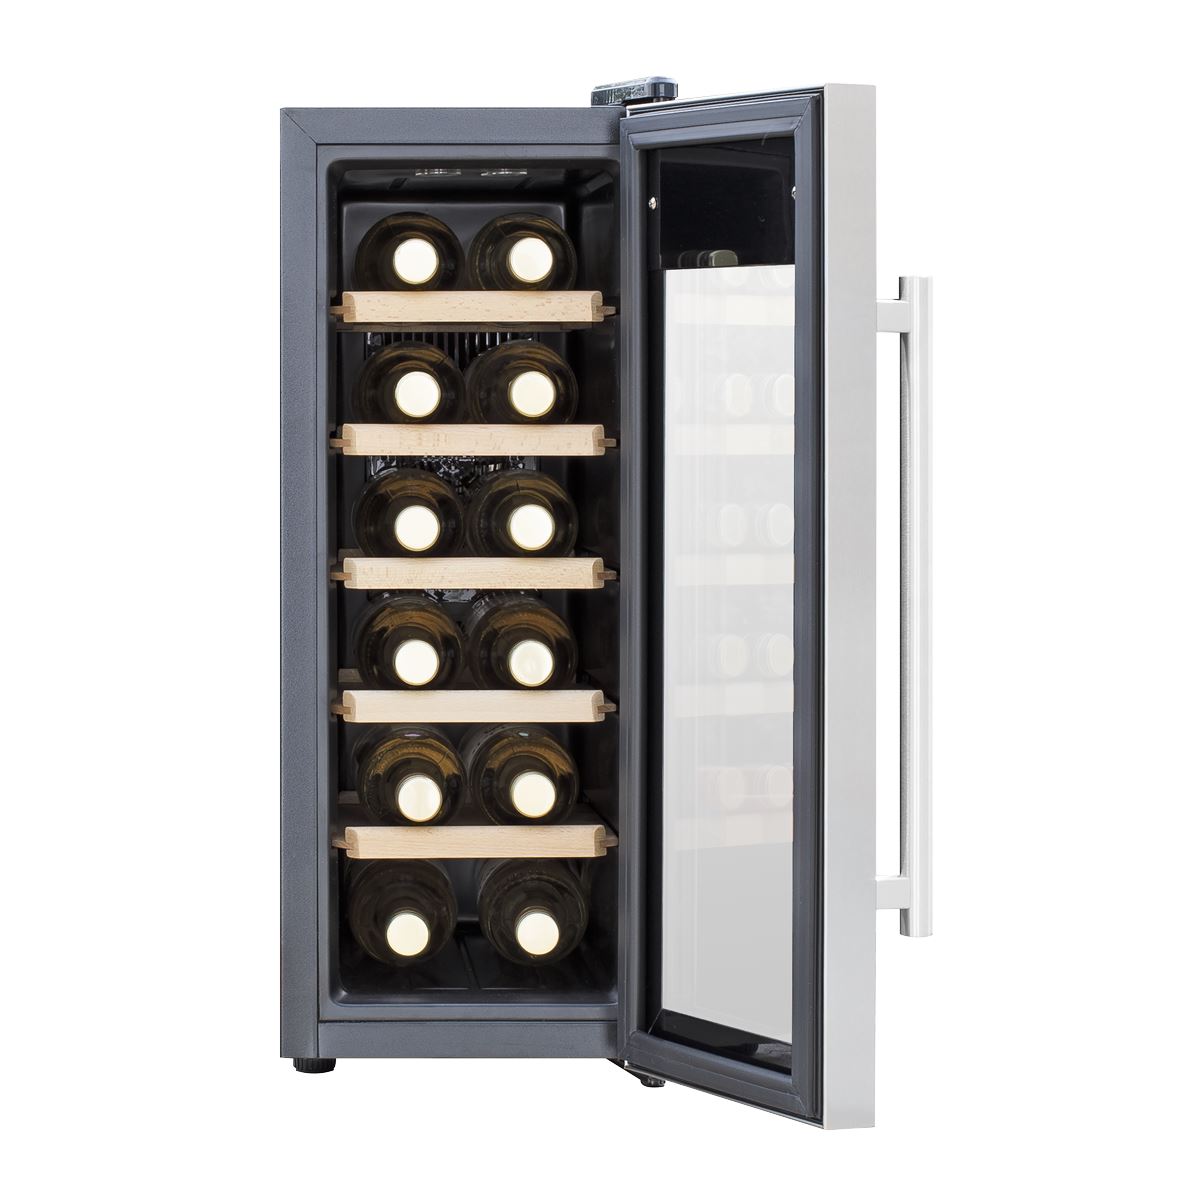 Baridi 12 Bottle Wine Cooler with Digital Touchscreen Controls & LED Light, Stainless Steel